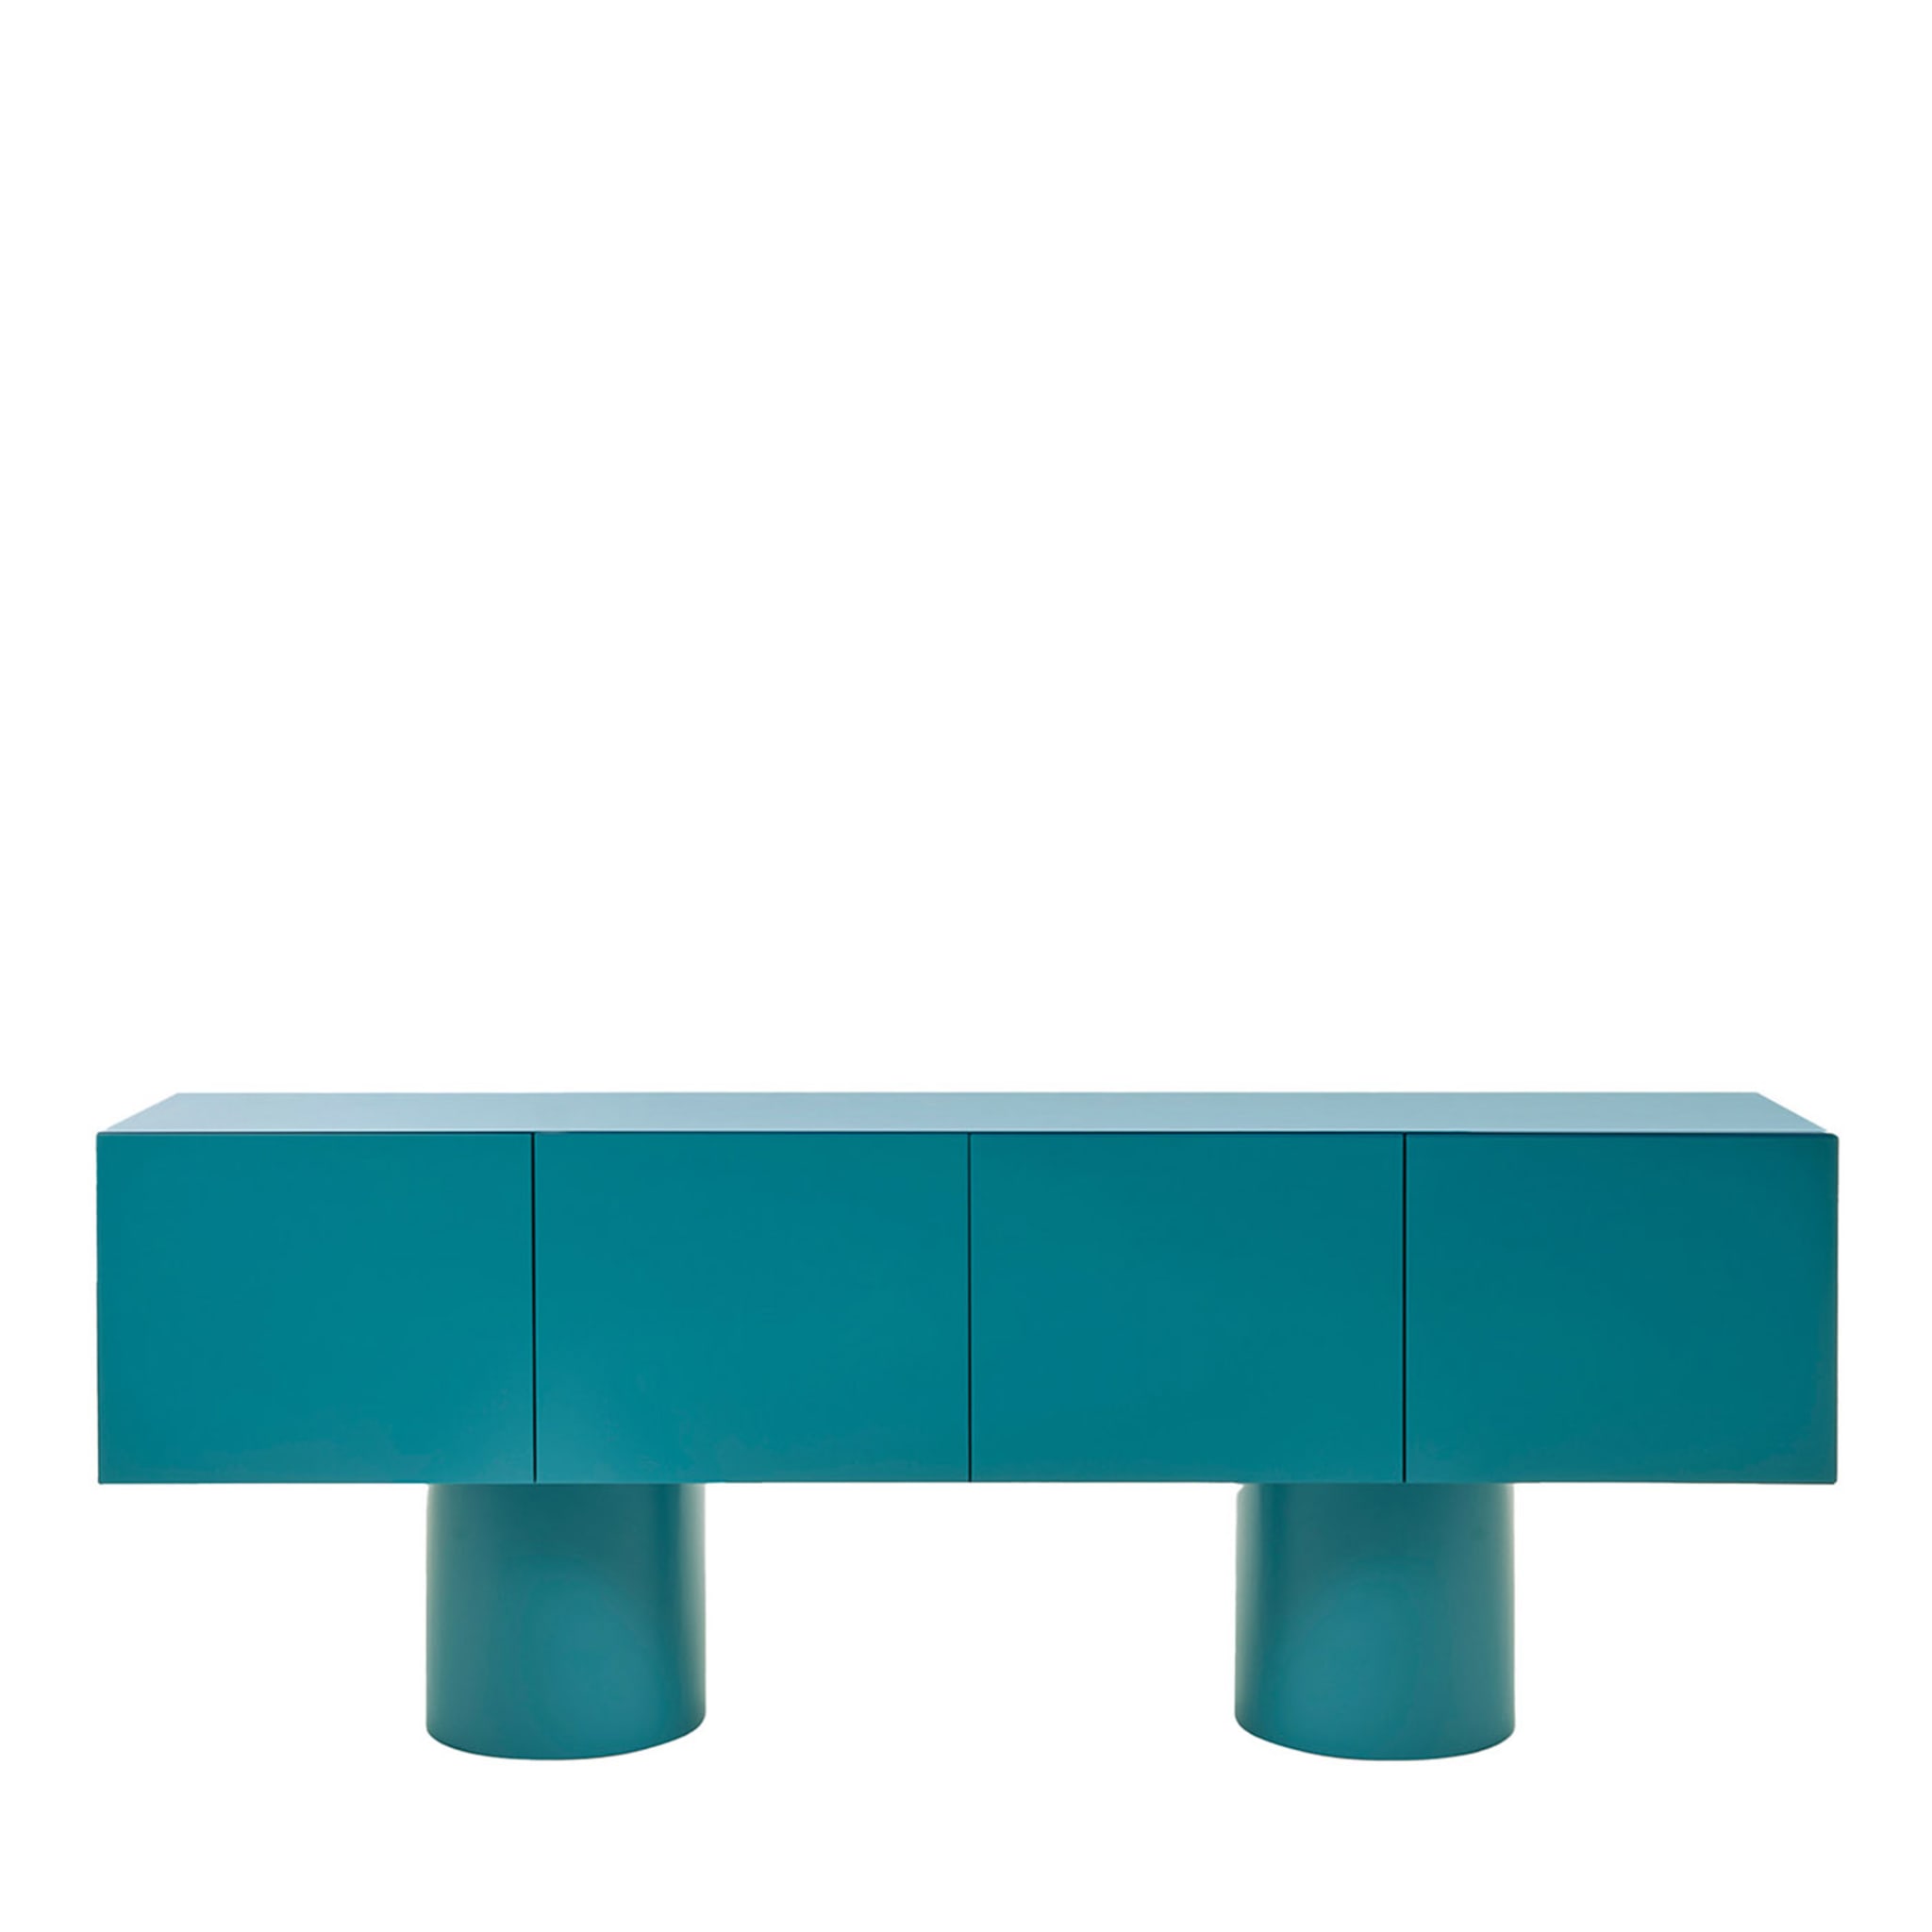 Giunone Teal Sideboard 1 by Claudio Bitetti - Main view